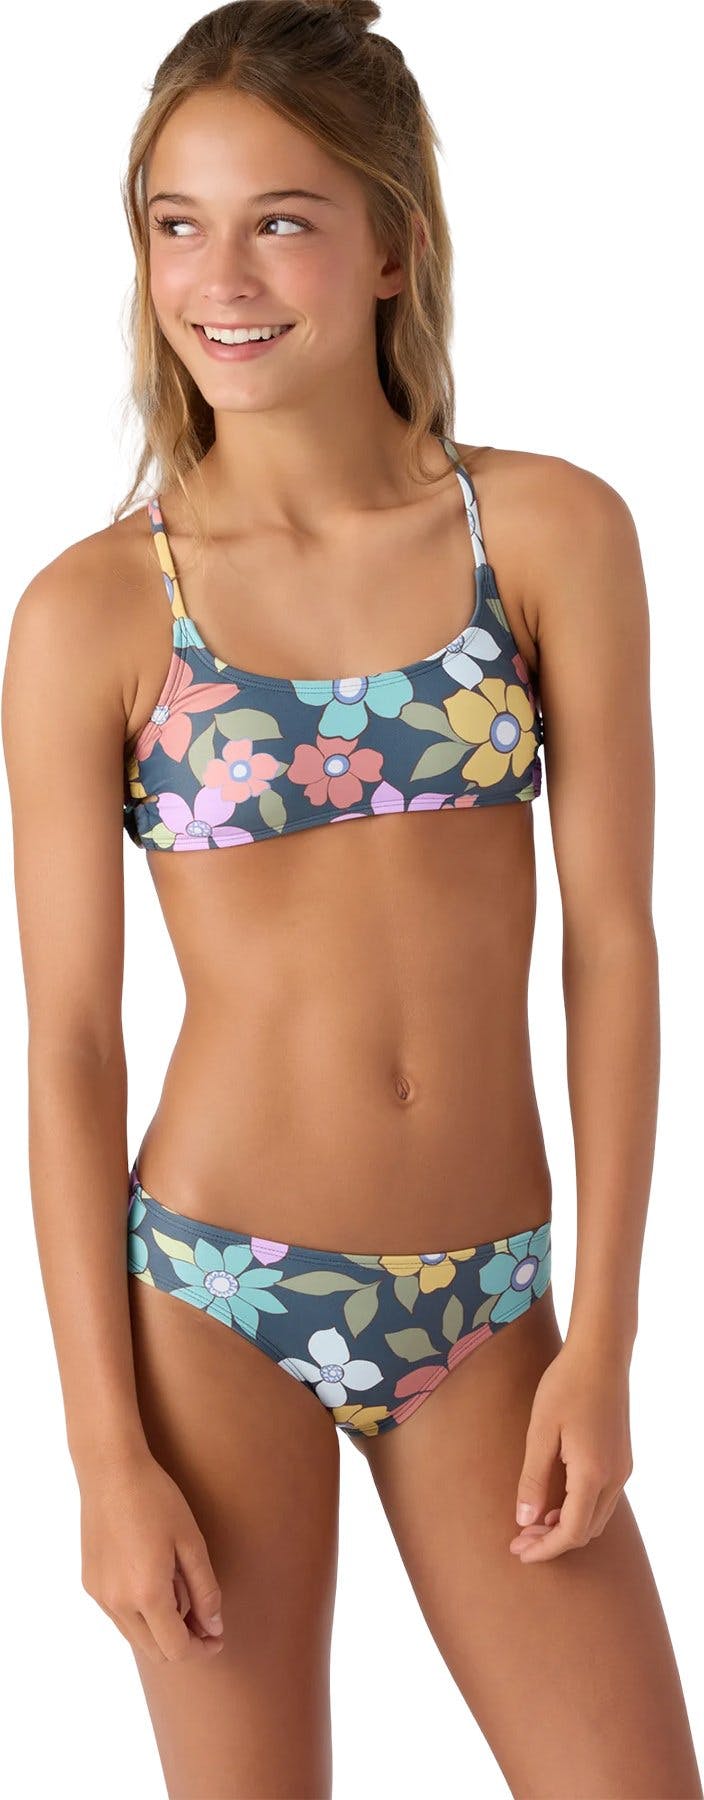 Product image for Layla Floral Bralette Swim Set - Girl's